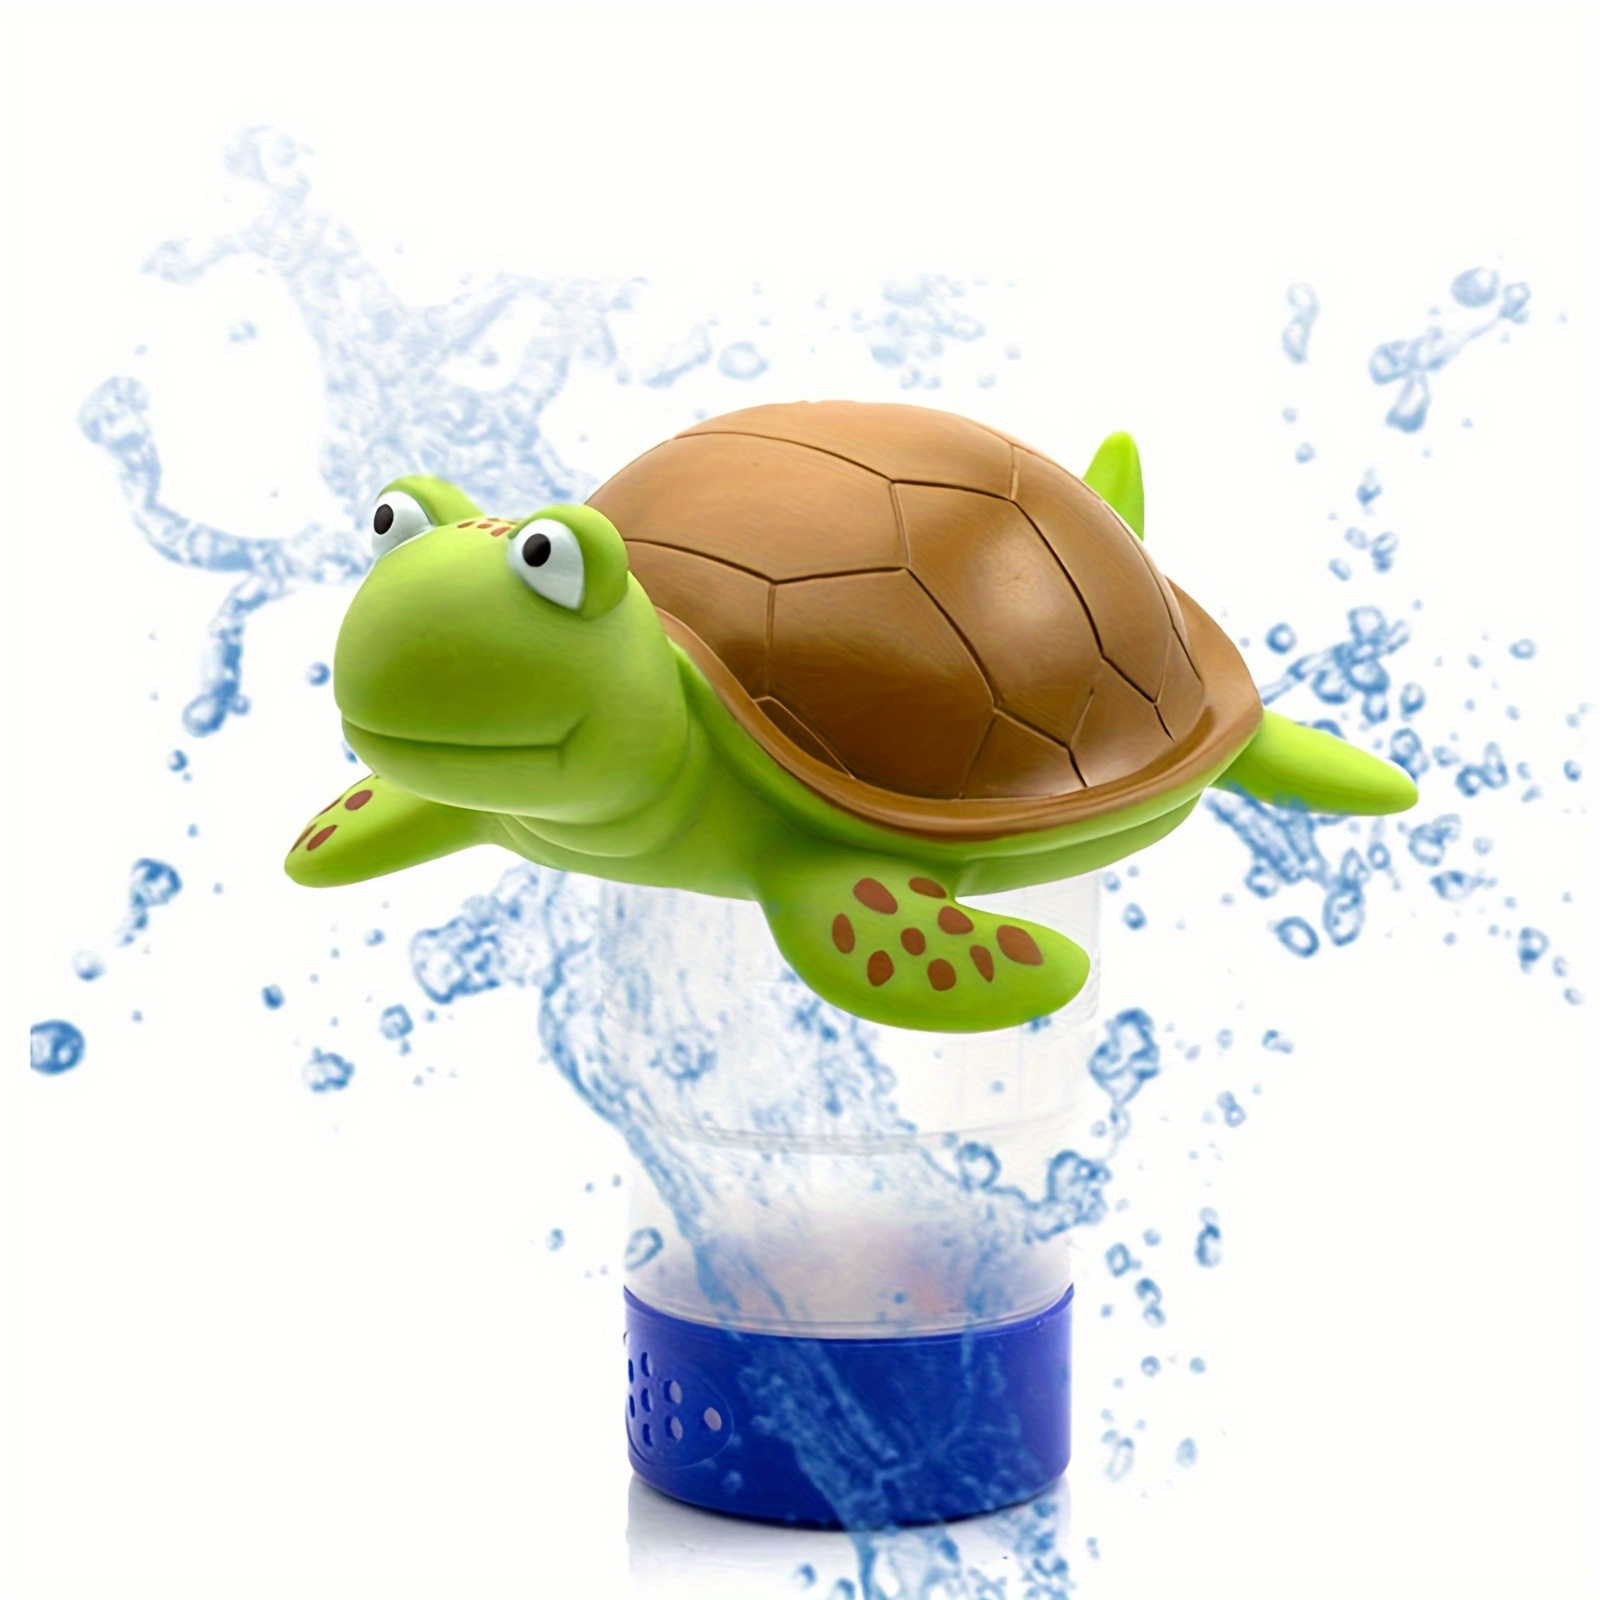 

1pc, Floating Turtle-shaped Pool Chlorine Dispenser, Adjustable Chemical Floater, Easy To Use, Durable, For Swimming Pool Water Treatment, Keeps Water Clean, 9.3x8.9 Inches